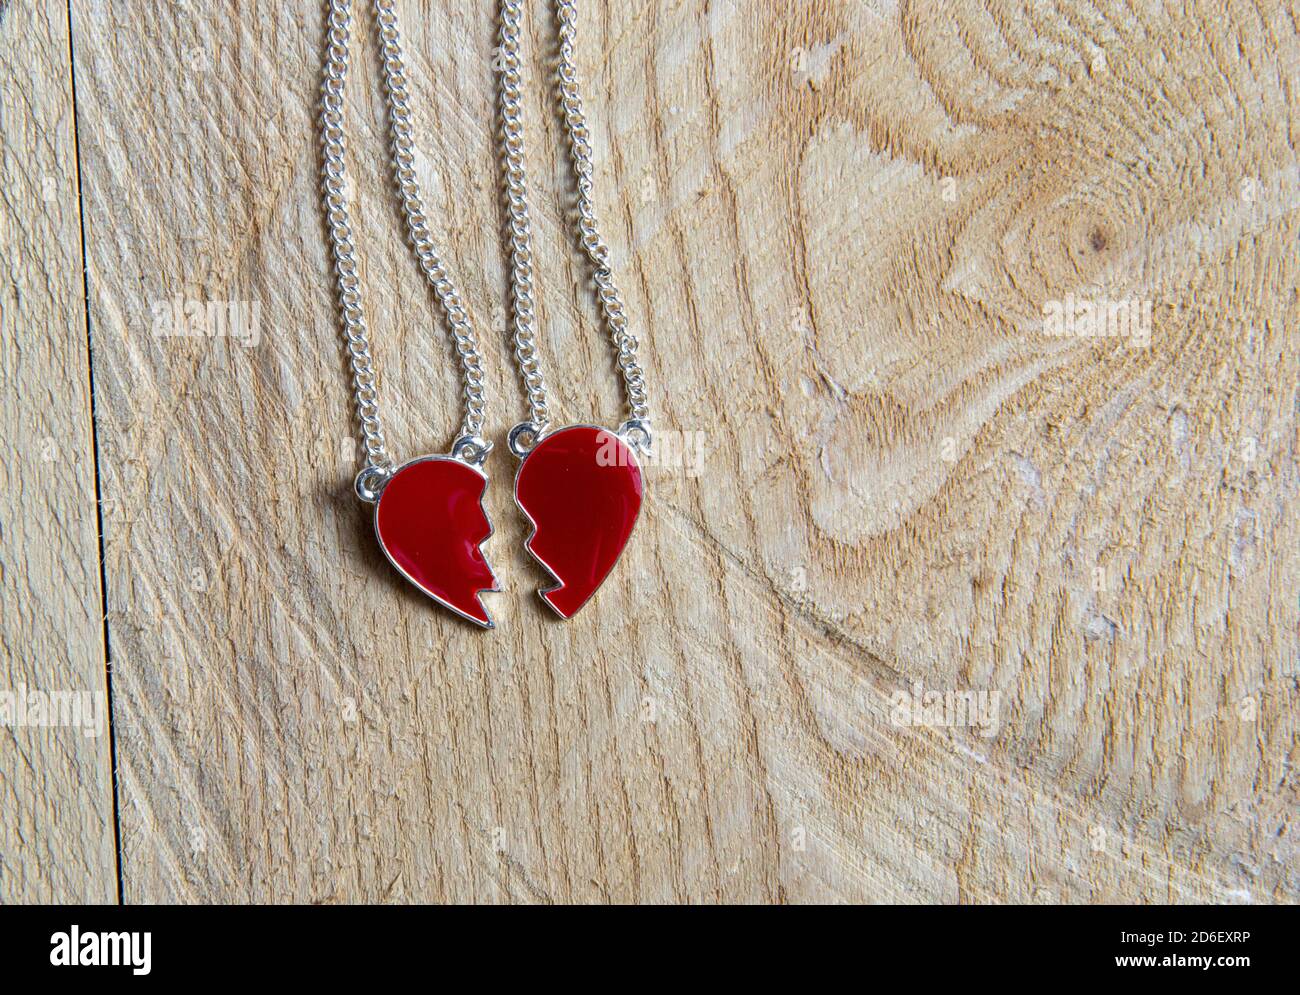 fcity.in - Sullery Couple Plain Broken Heart Necklace Pendant With Dual  Locket